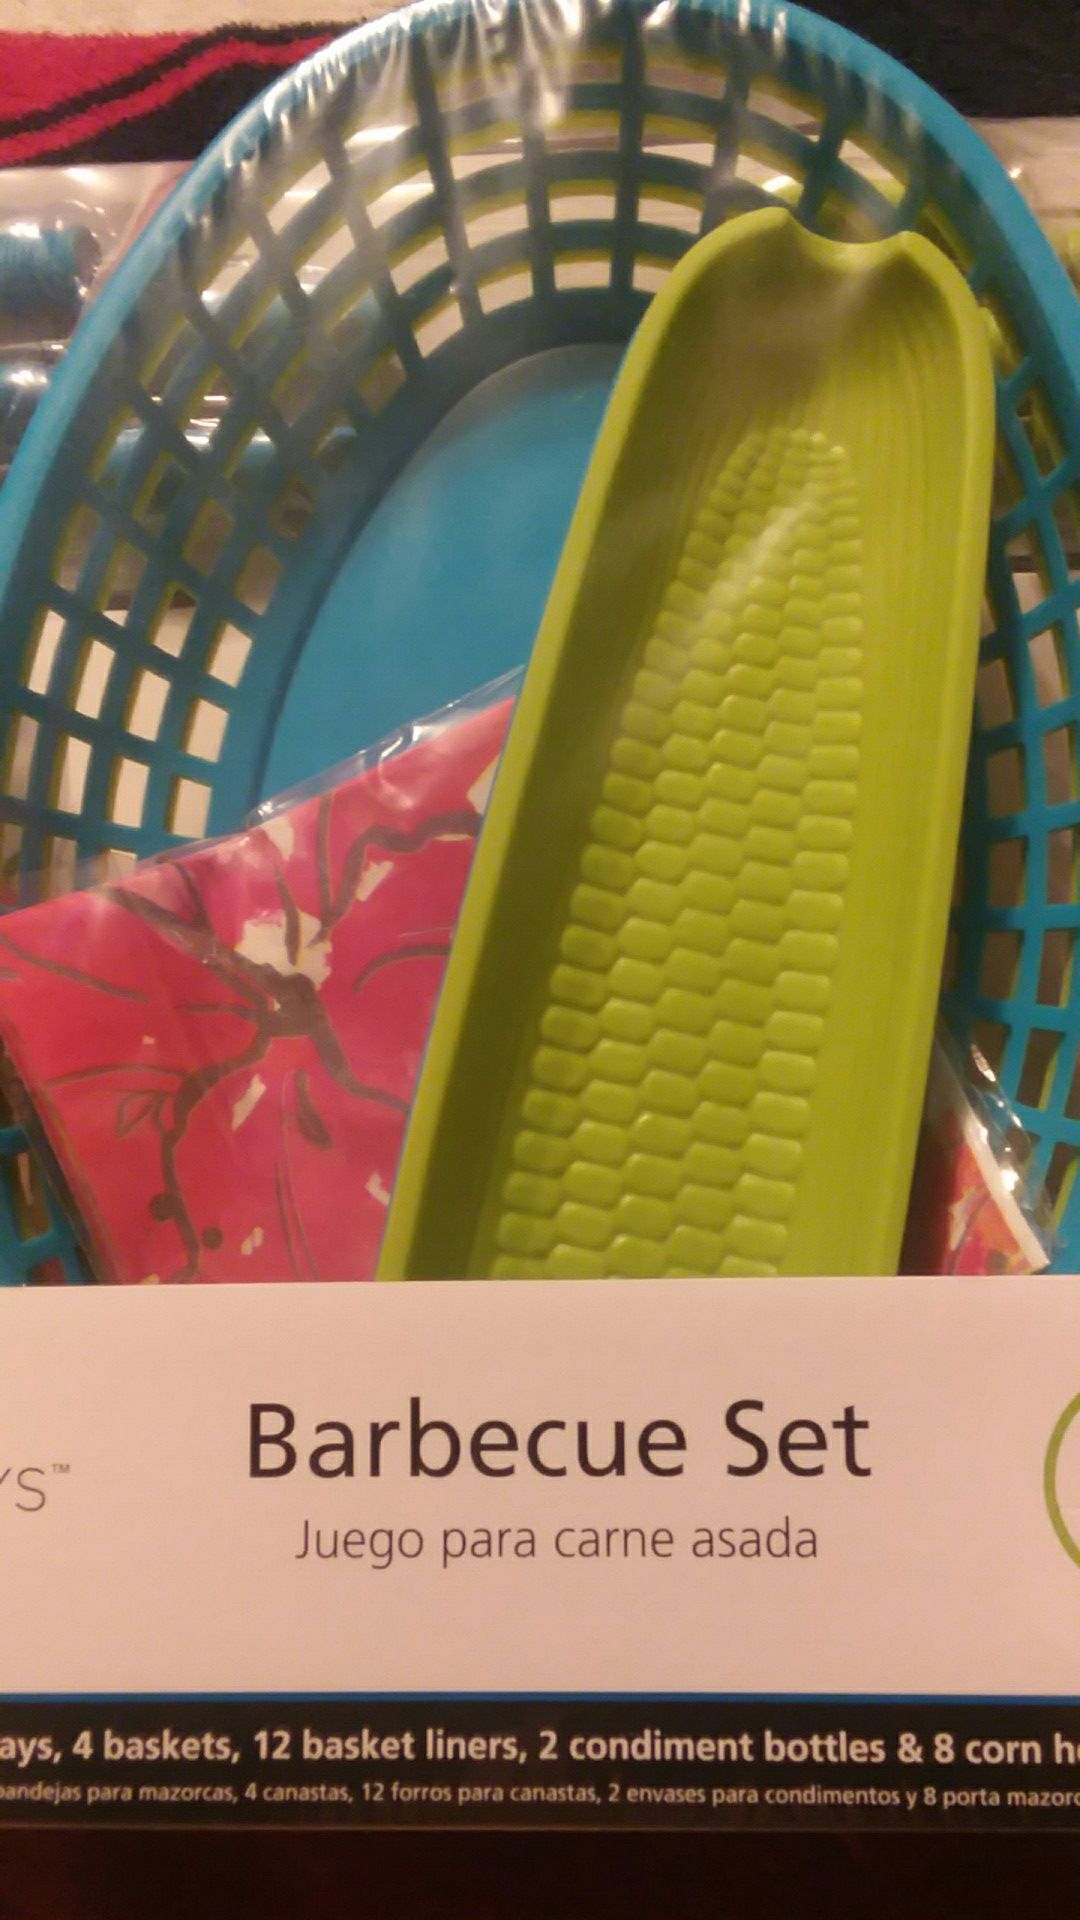 Brand new barbecue set 30 pieces